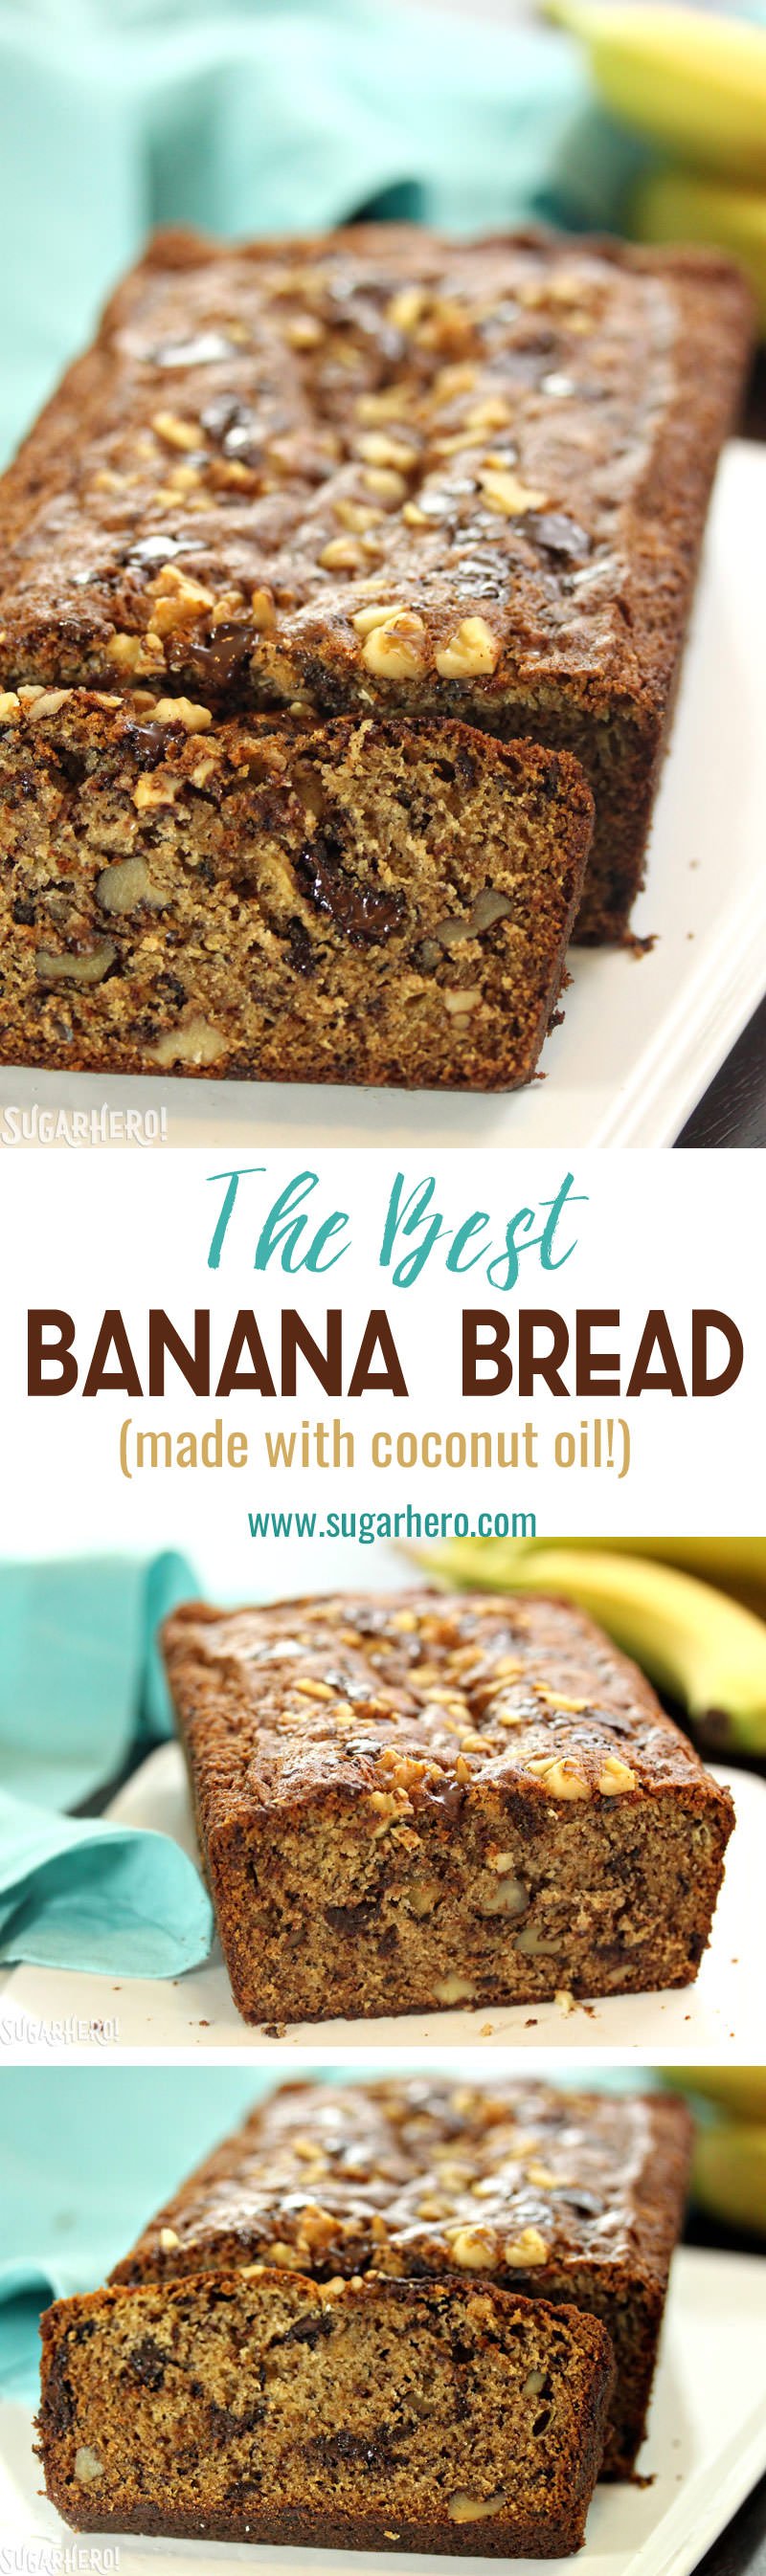 The ultimate banana bread - made with coconut oil and lots of chocolate chunks! | From SugarHero.com